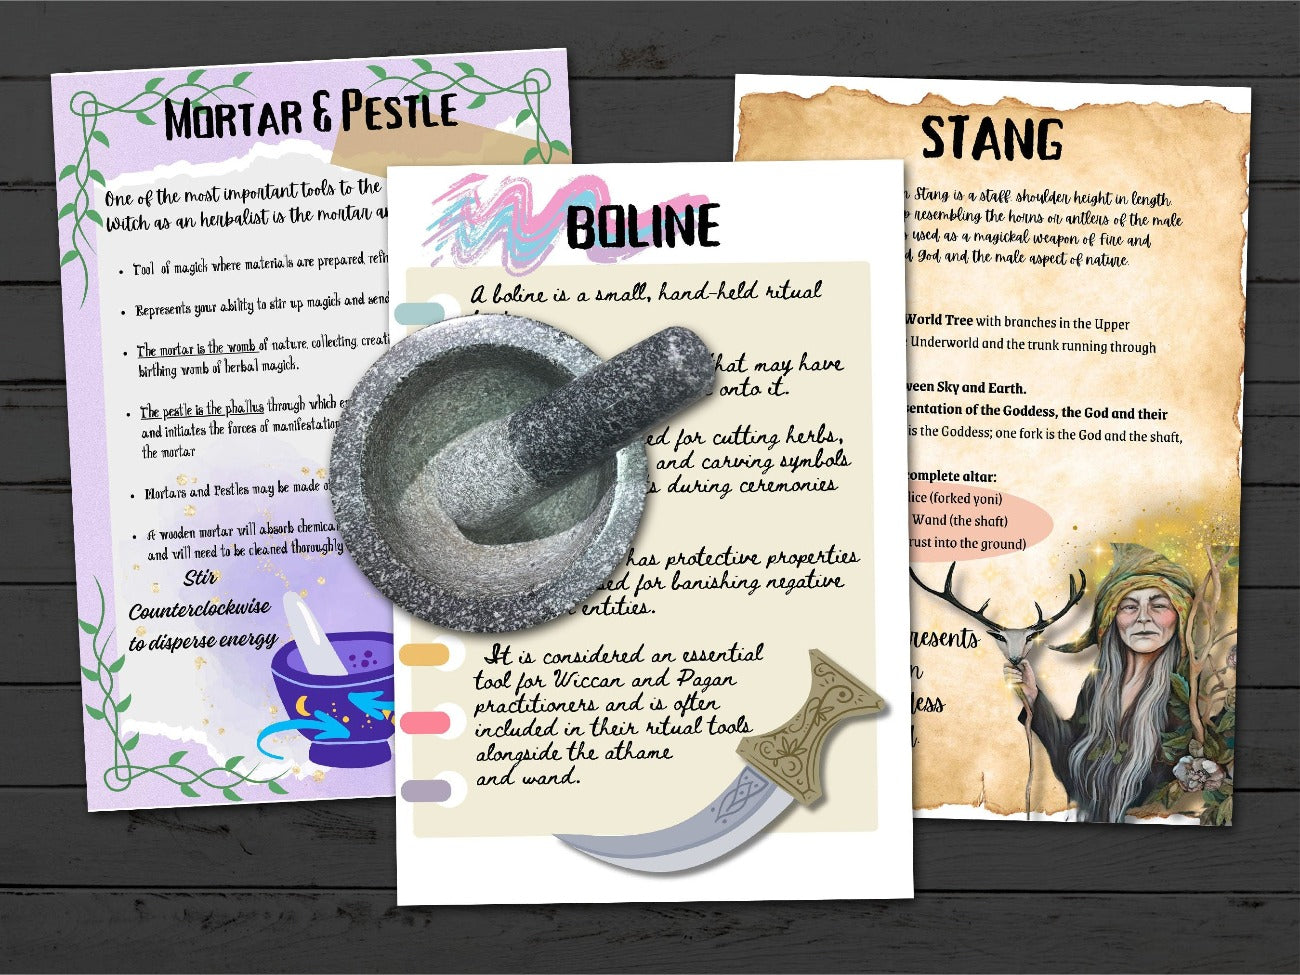 WICCA ZINE Lesson 6 - Mortar and Pestle, Boline and Stang pages - Morgana Magick Spell